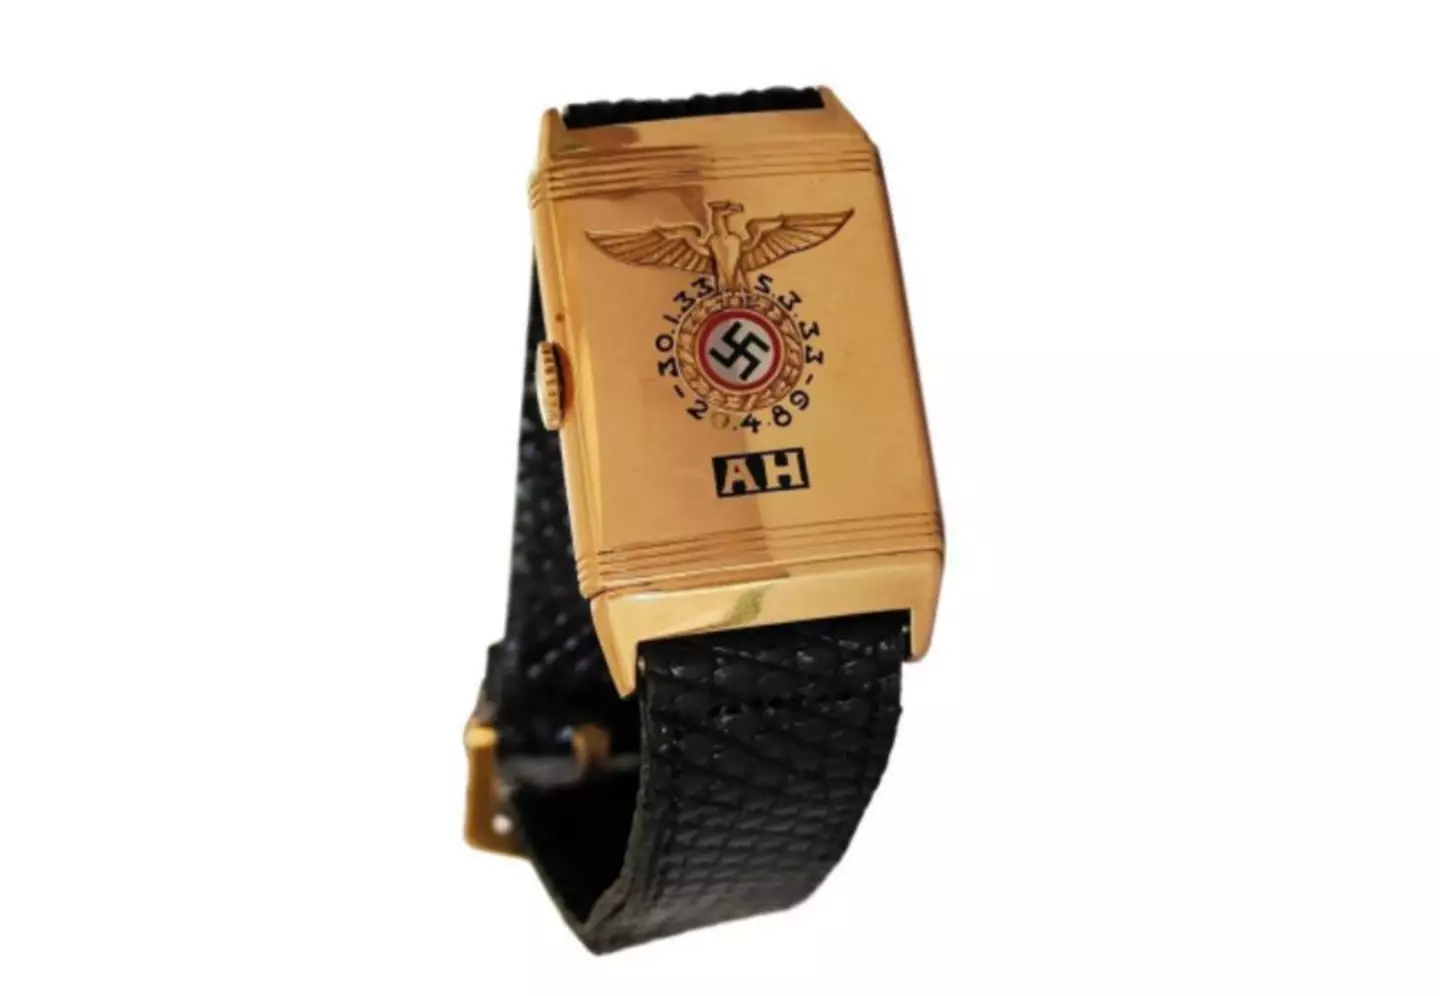 The Huber watch that is believed to have belonged to Adolf Hitler sold for $1.1 million at auction in the US.